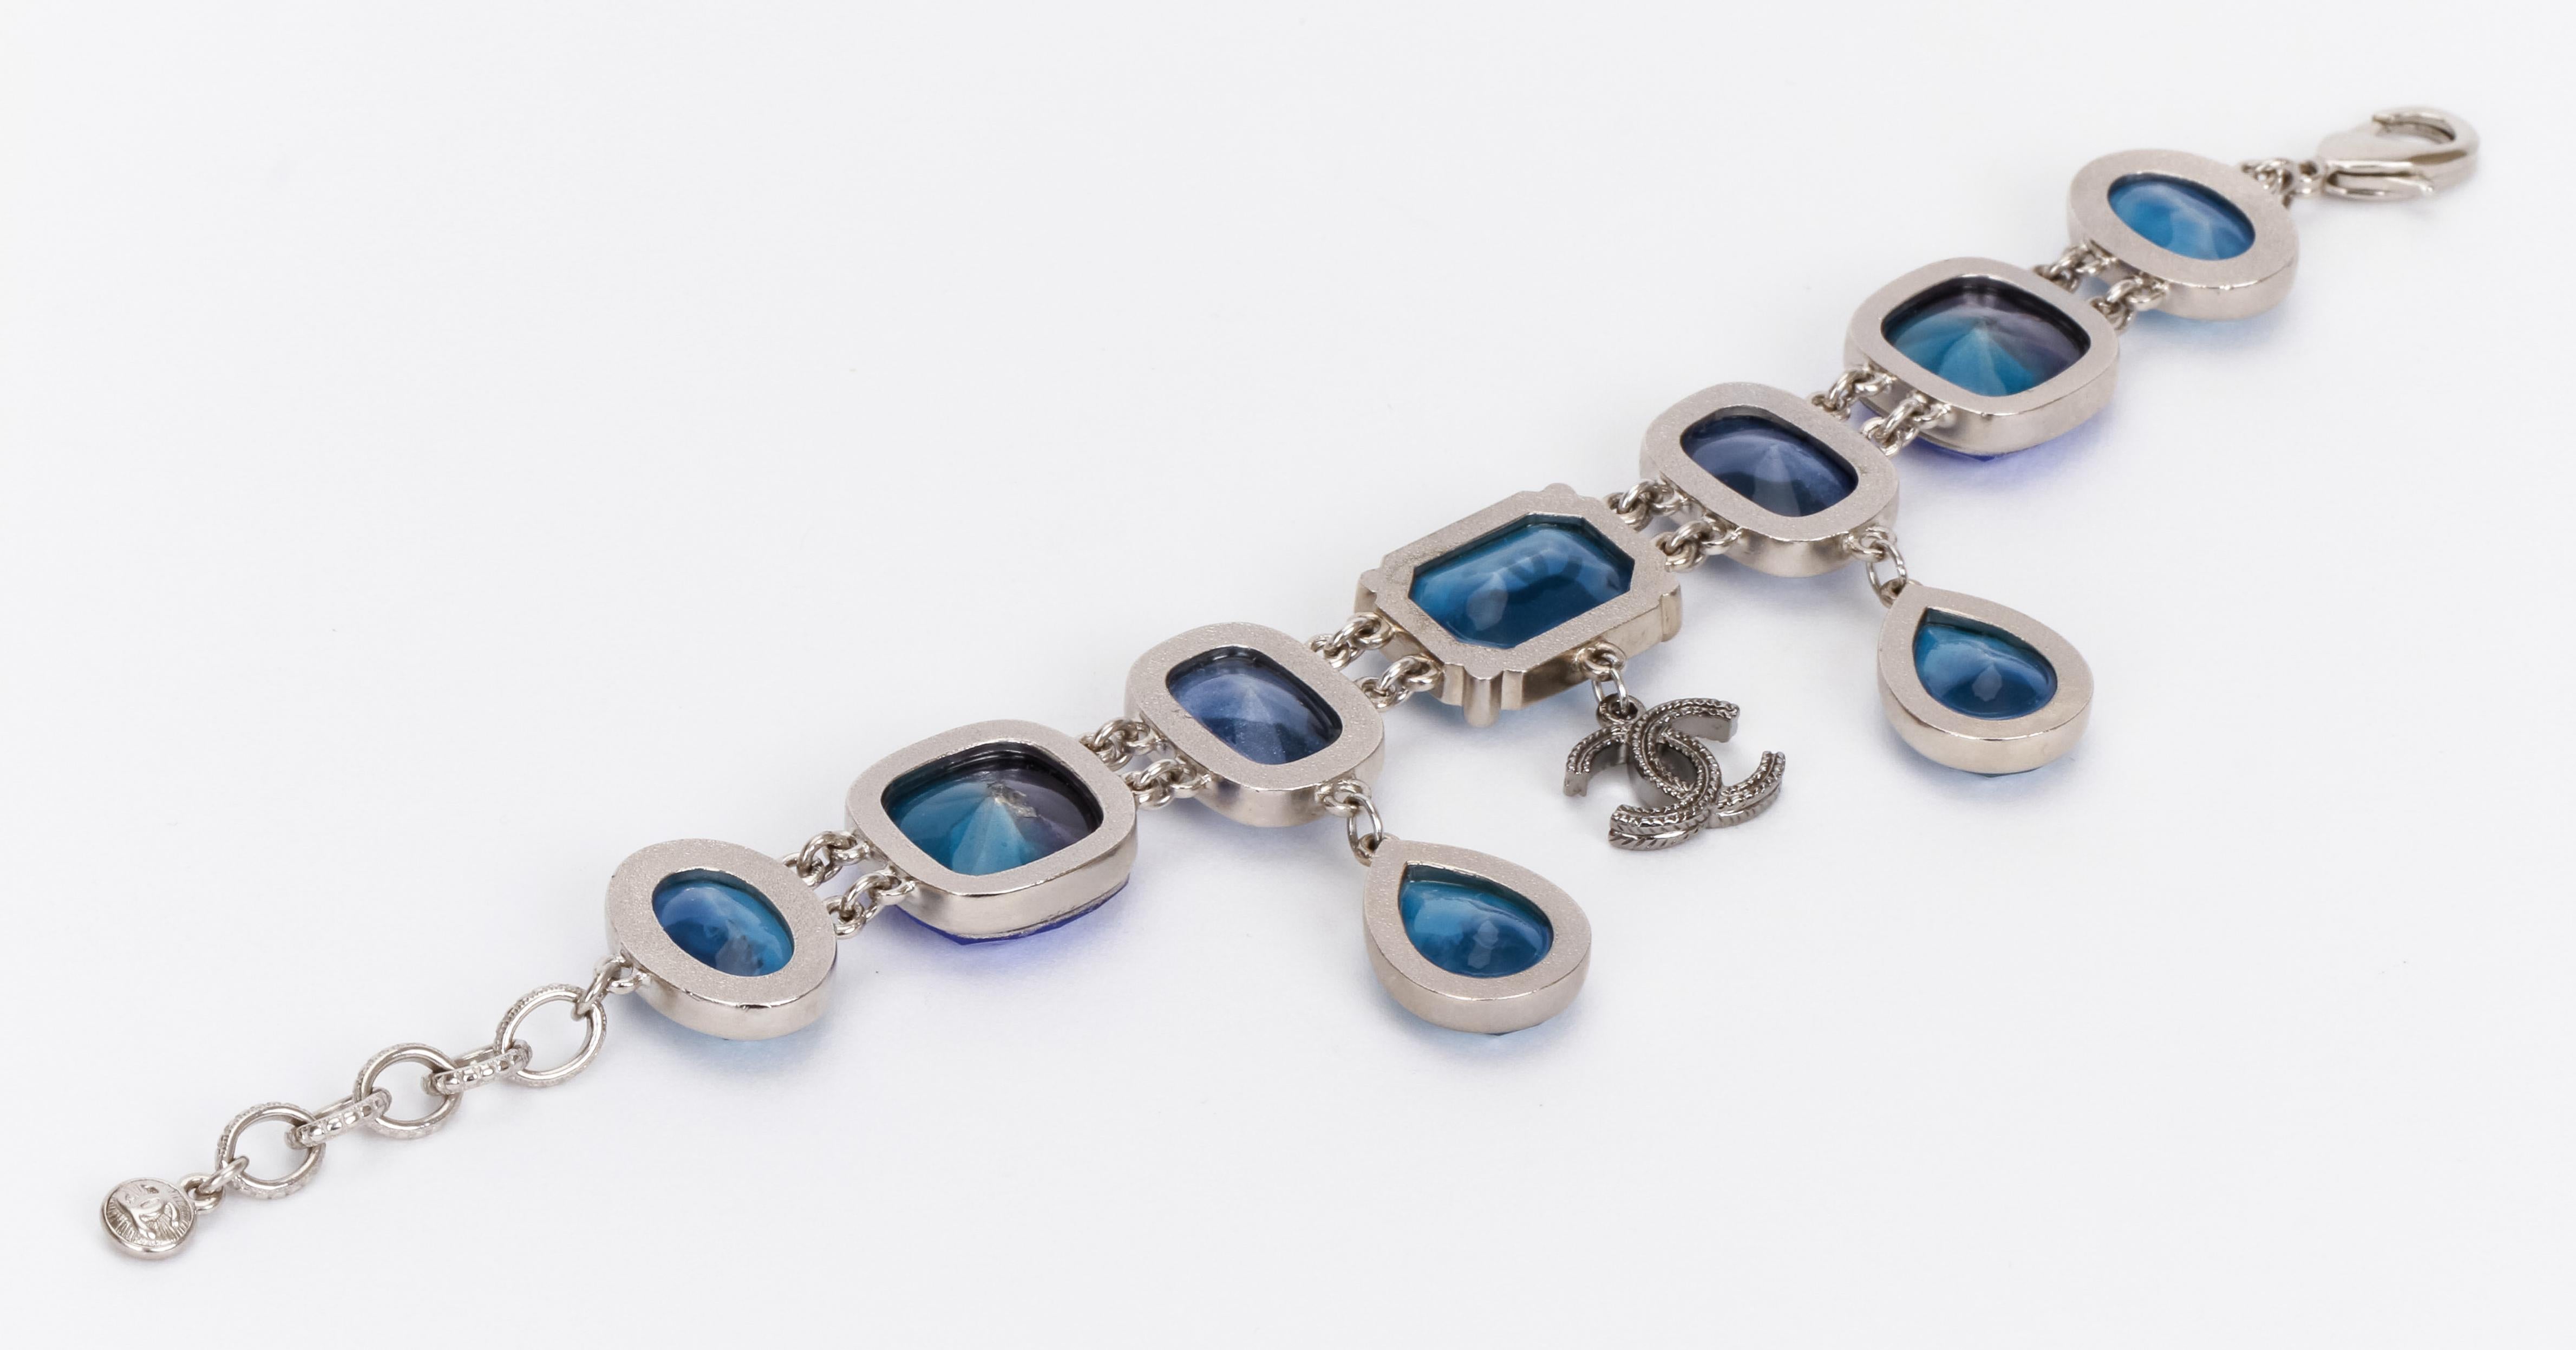 Chanel Blue Stone Charm Bracelet In Excellent Condition For Sale In West Hollywood, CA